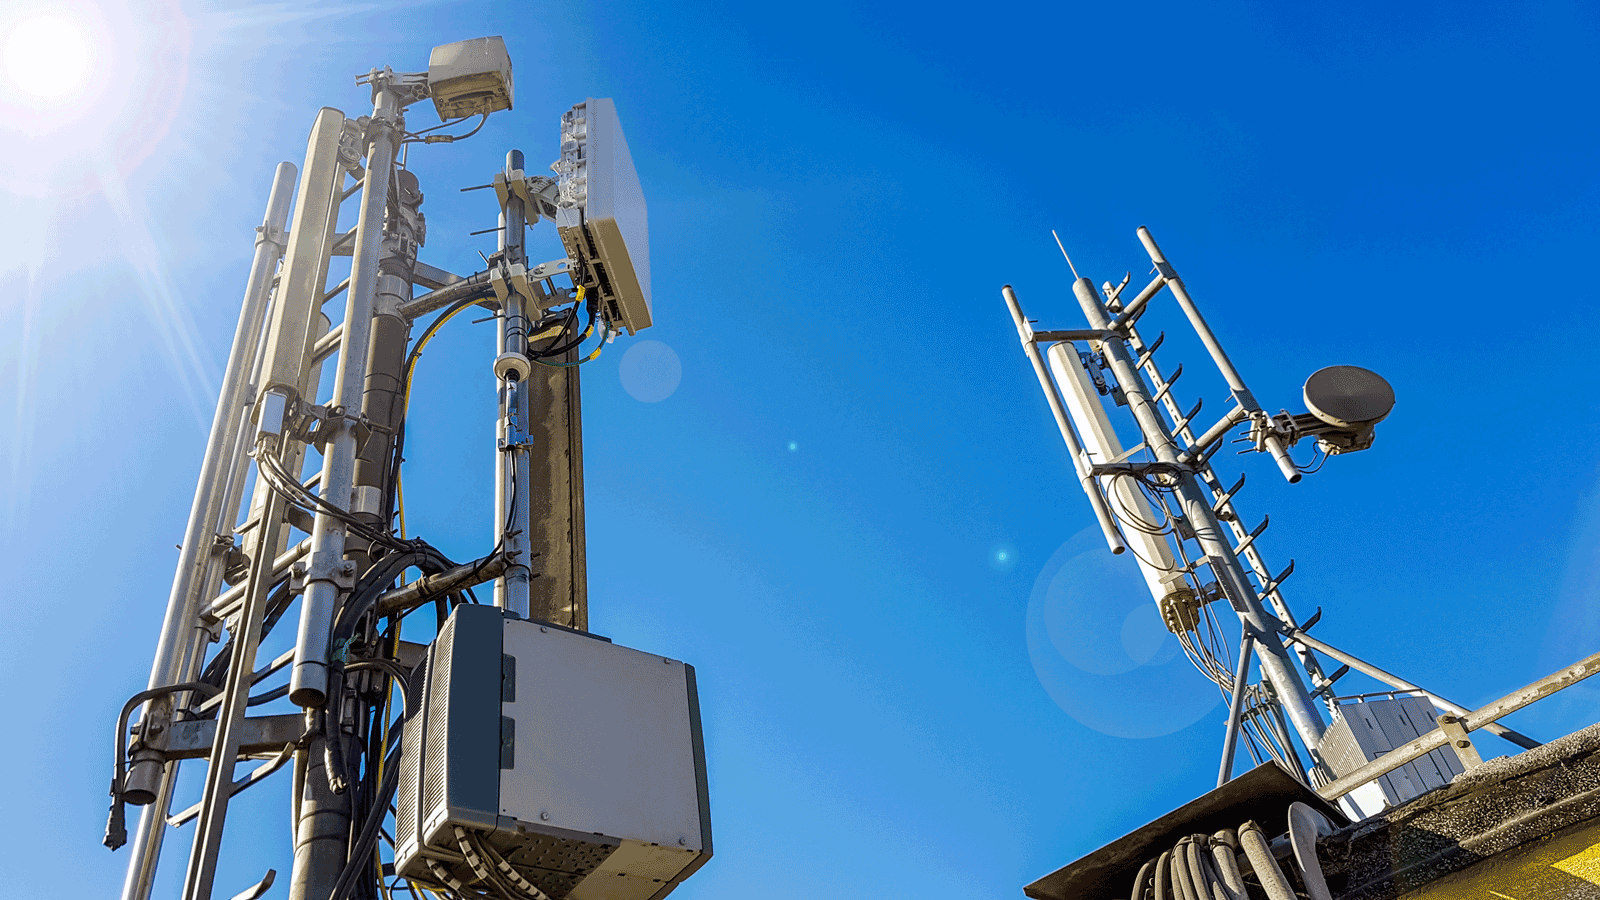 5G deployment in the UK at risk from ‘investment gap’, industry warns